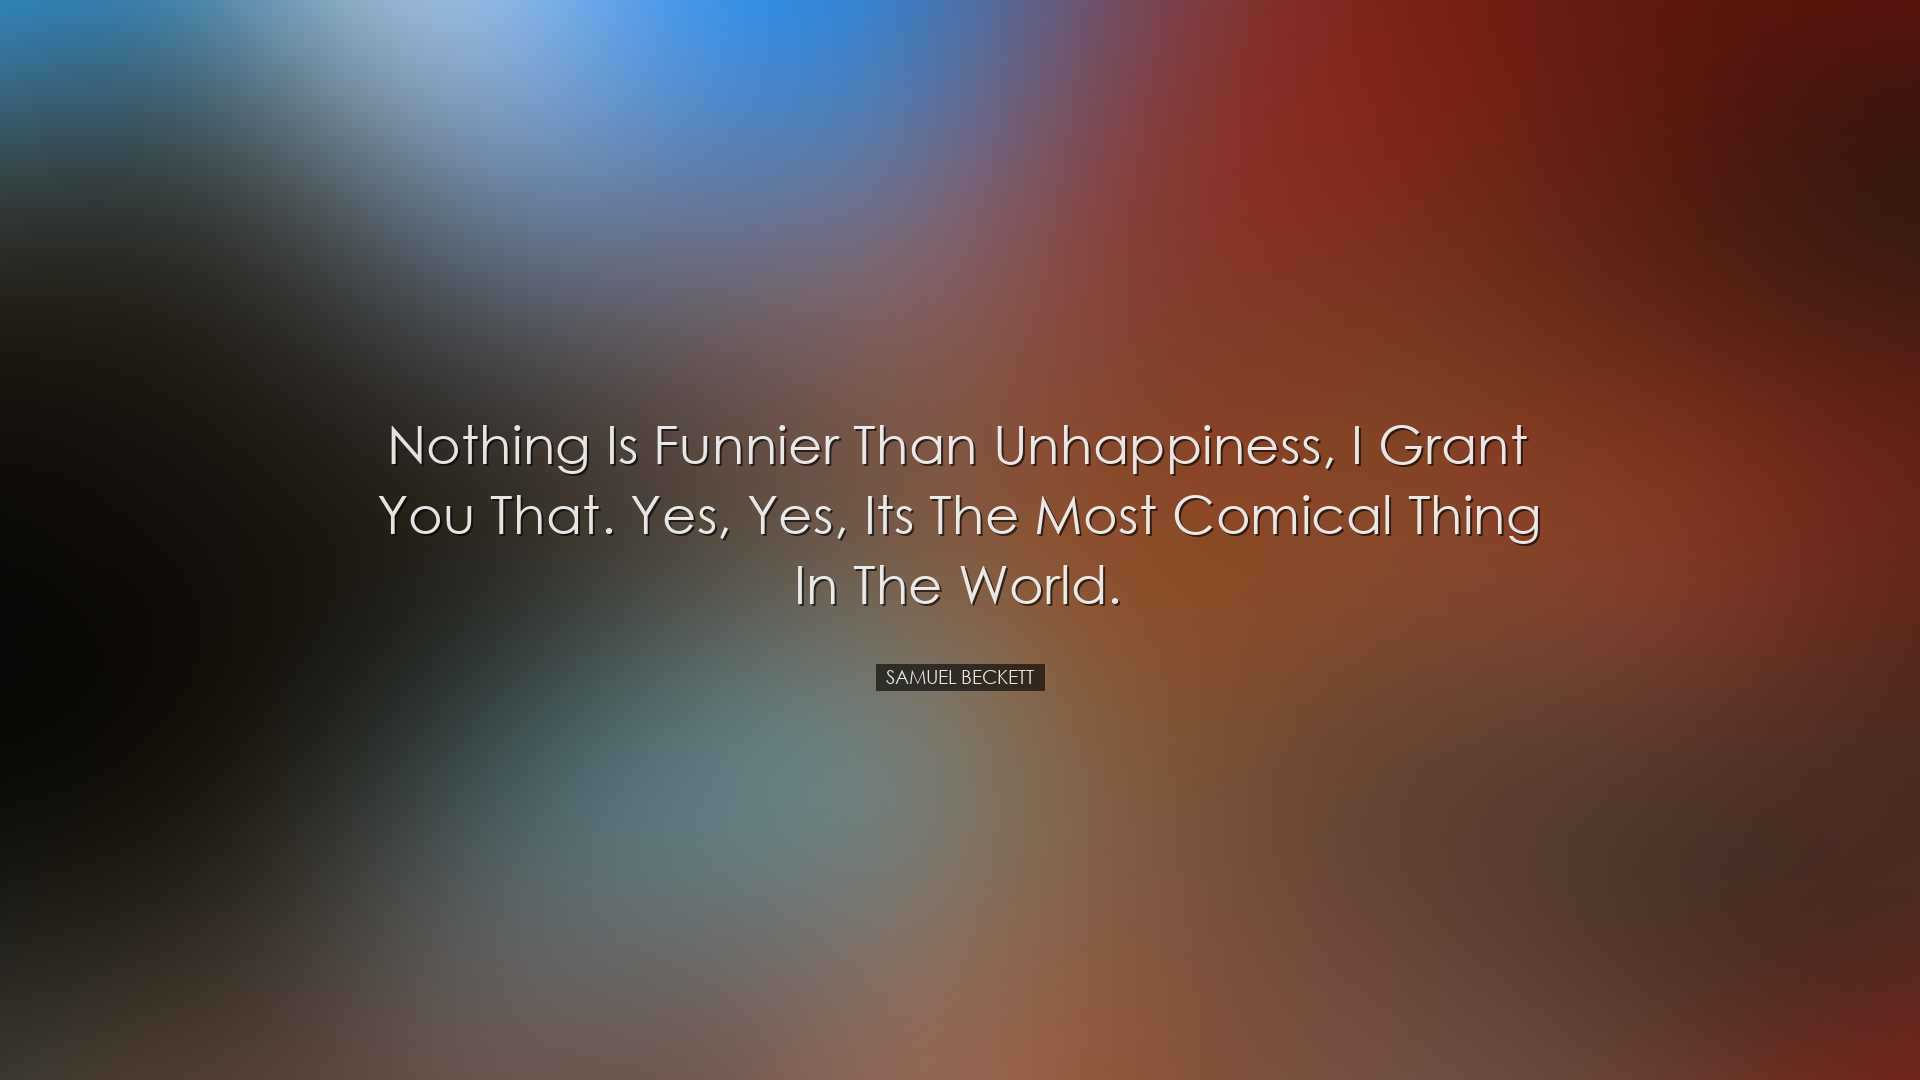 Nothing is funnier than unhappiness, I grant you that. Yes, yes, i